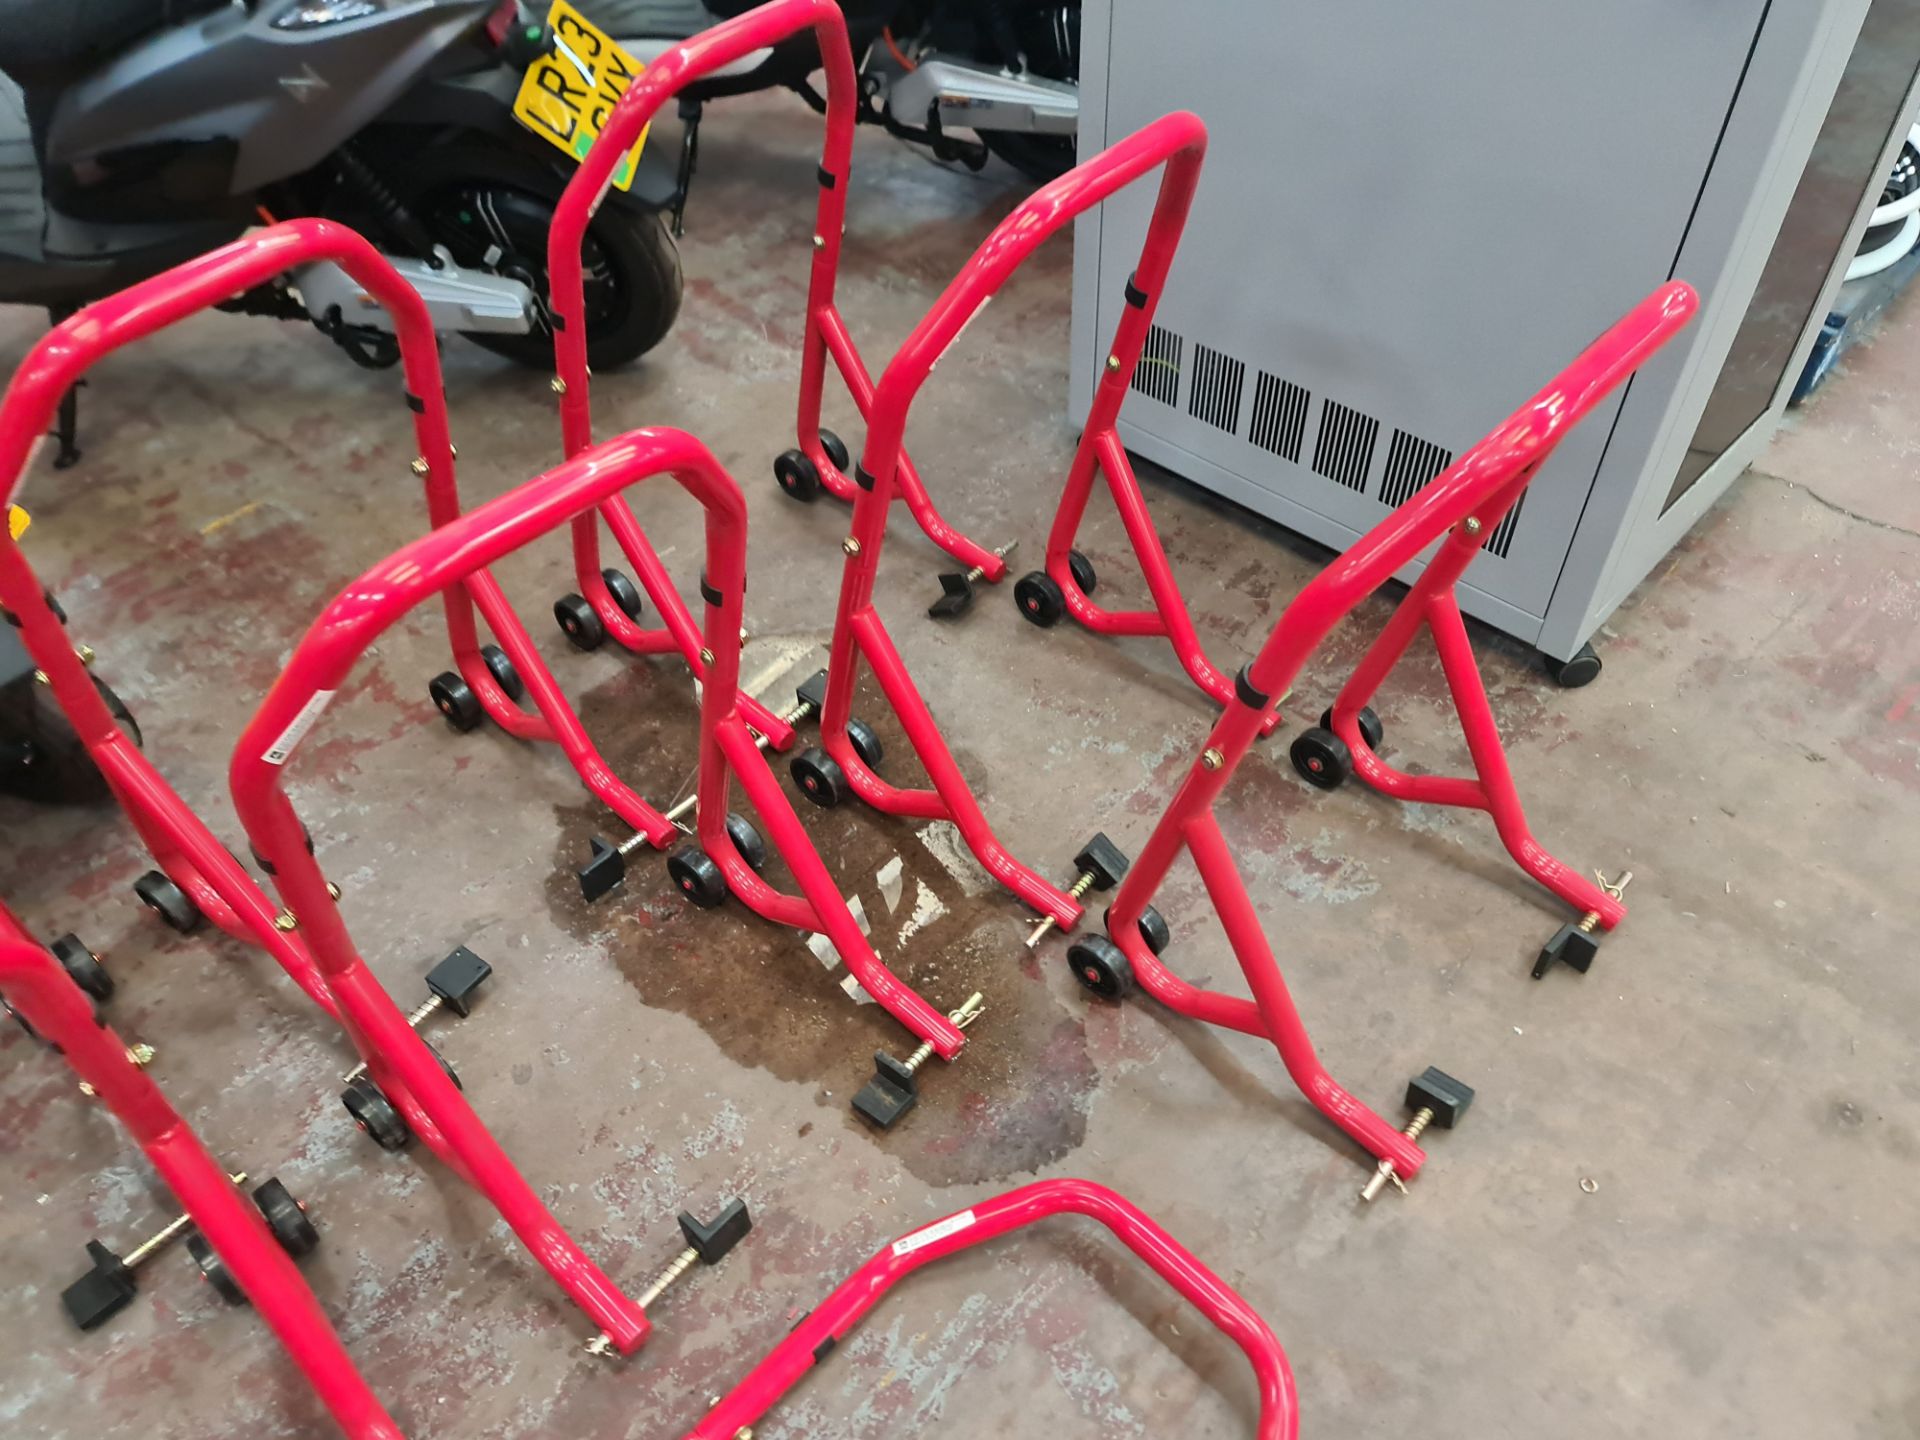 8 off motorcycle paddock stands - Image 6 of 6